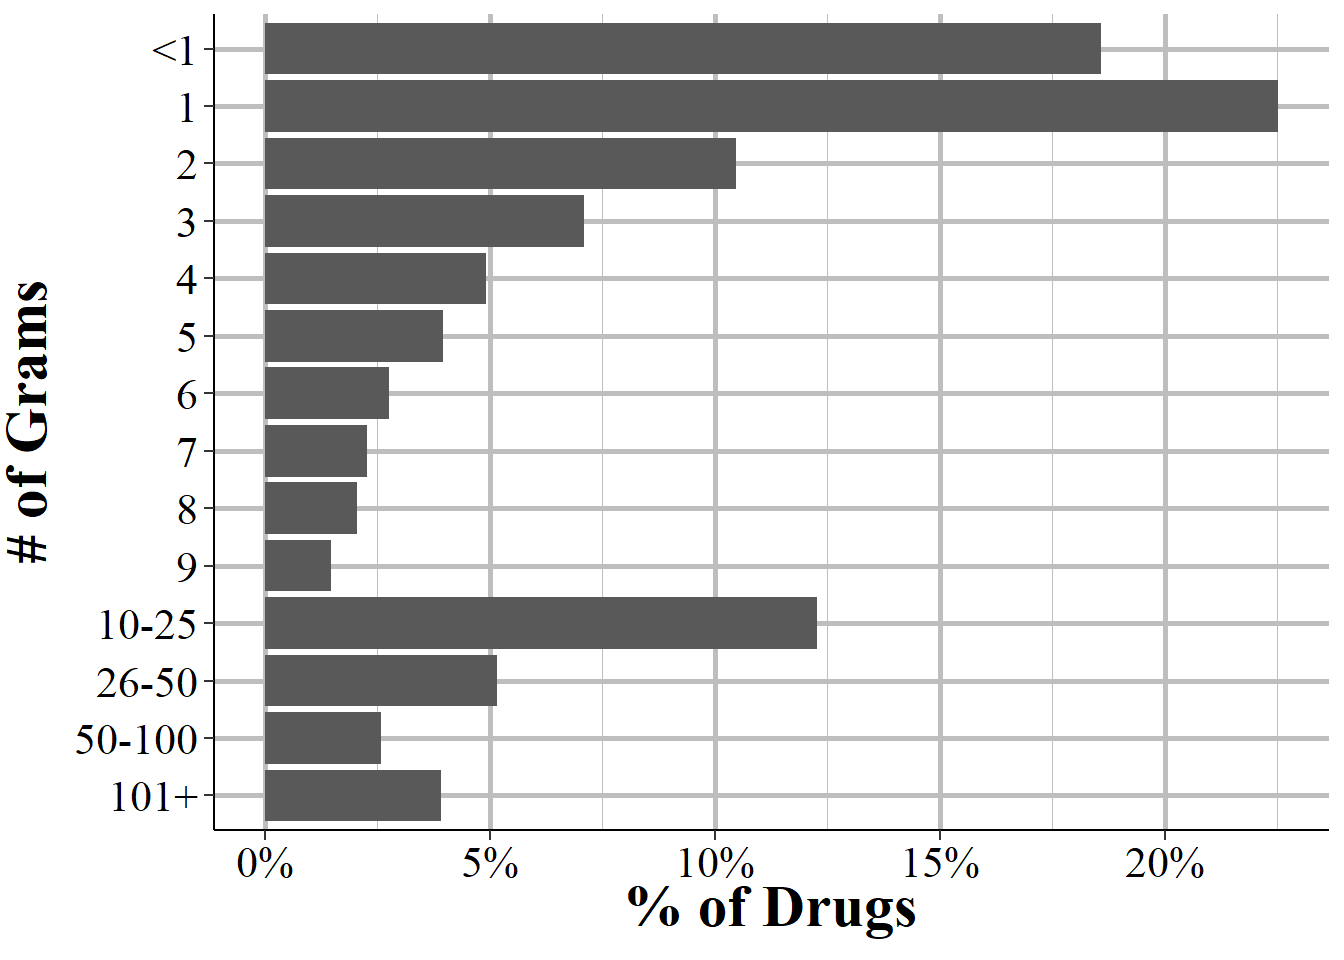 For drugs seized that are measured in grams, this figure shows the distribution in the number of grams seized. Values over 10 grams are grouped together for easier interpretation of lower values of drugs seized.